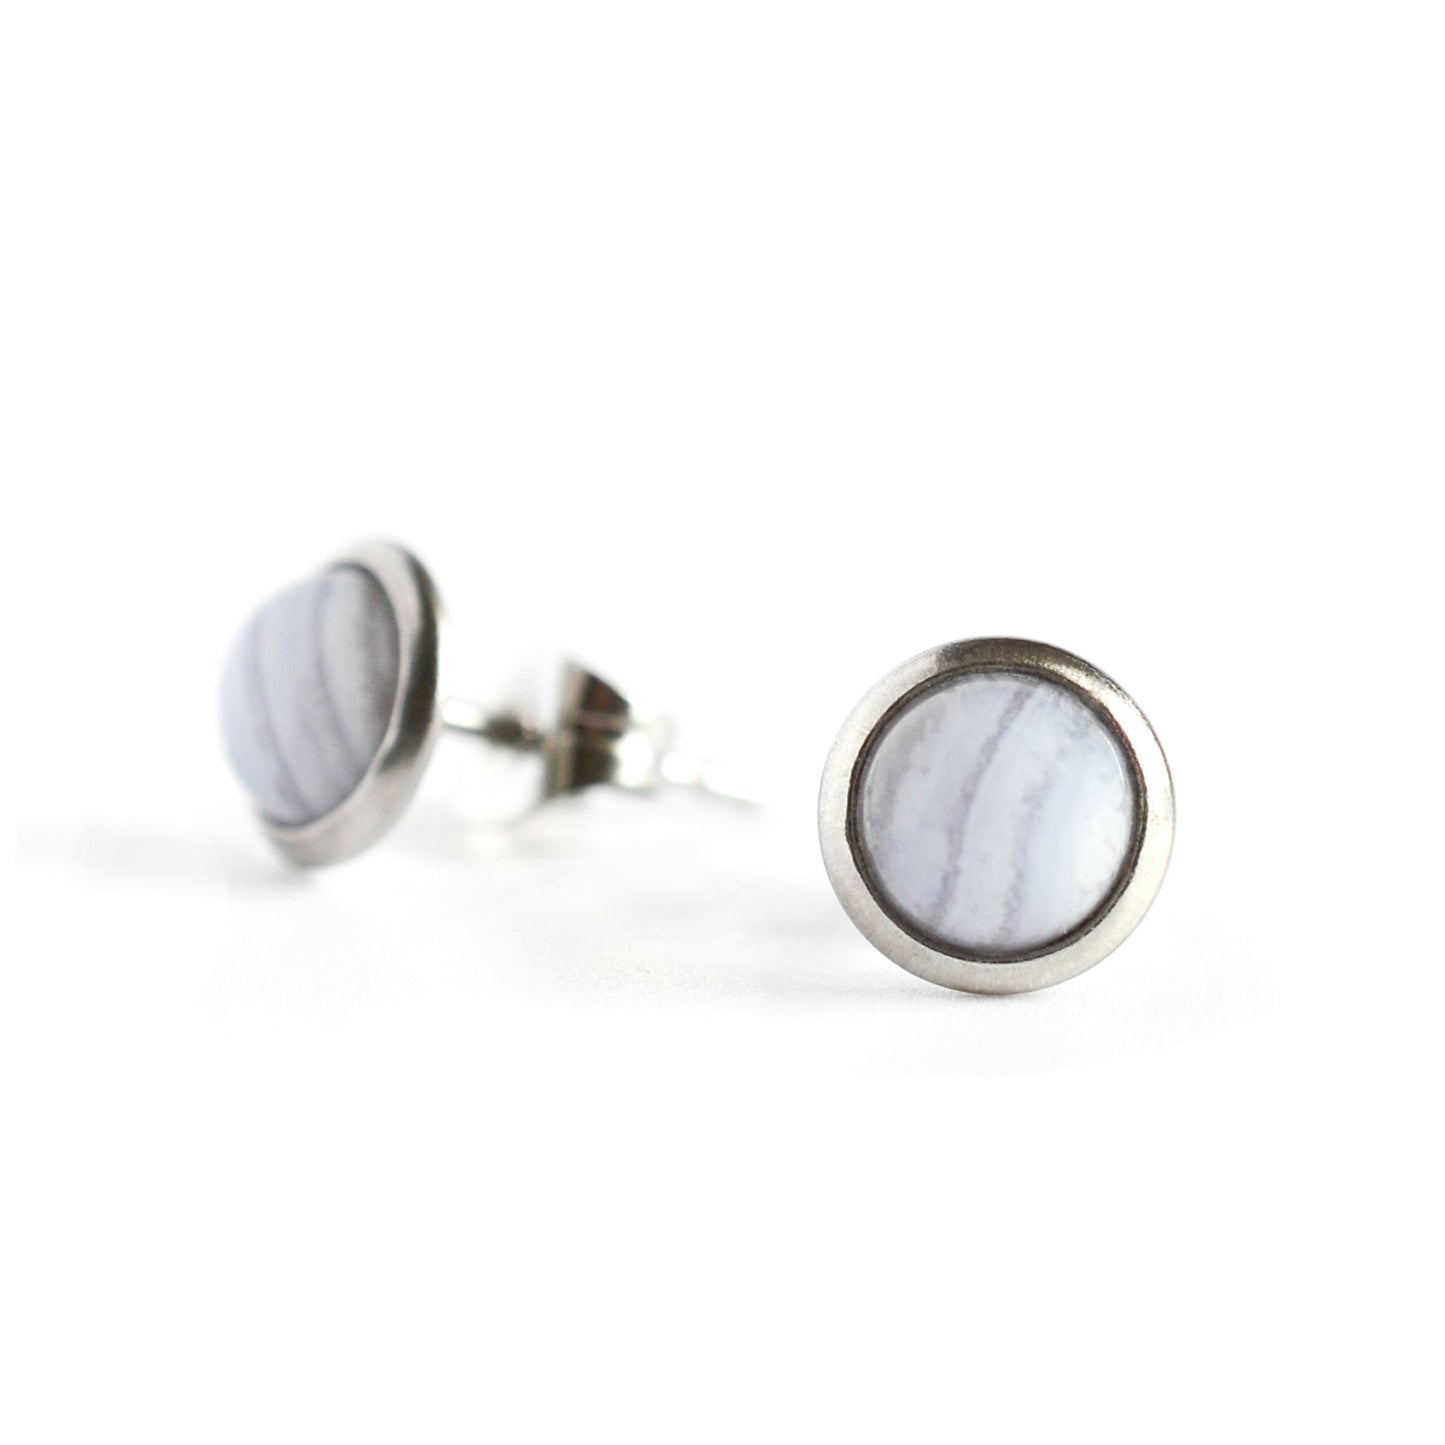 Round Blue Lace Agate and surgical steel stud earrings on white background